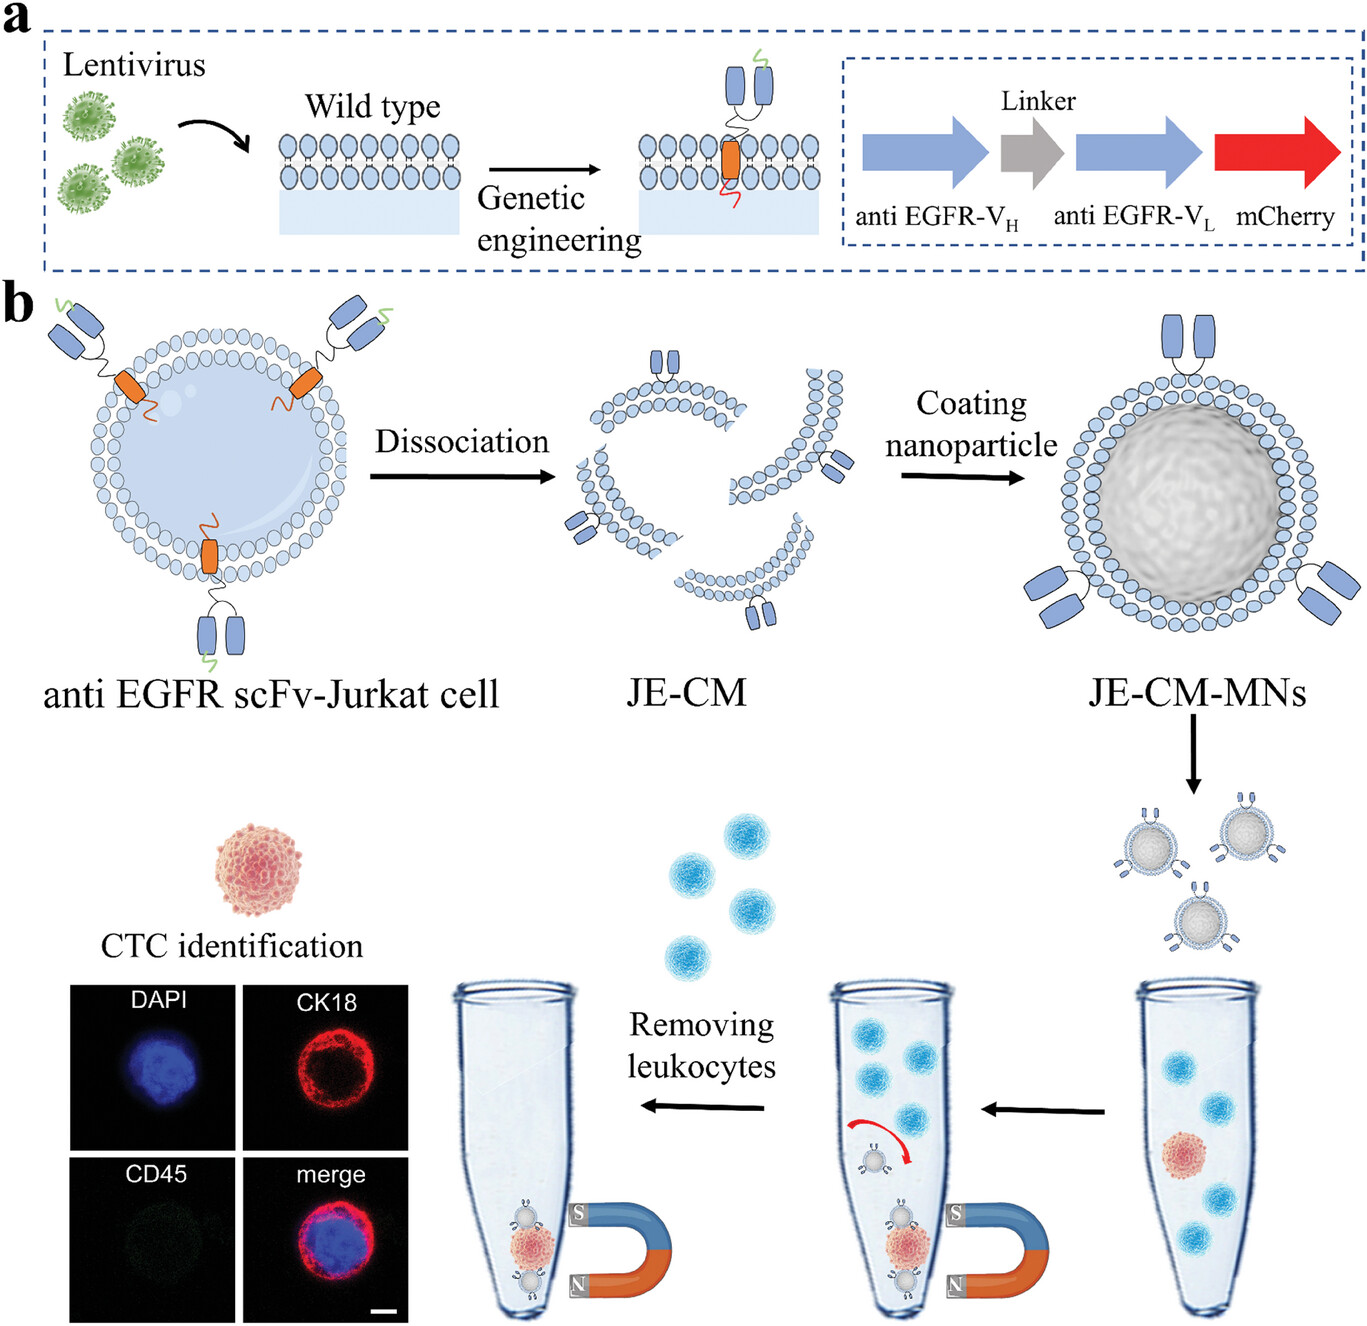 Construction of the genetically engineered cell membrane-based platform for isolation of circulating tumor cells